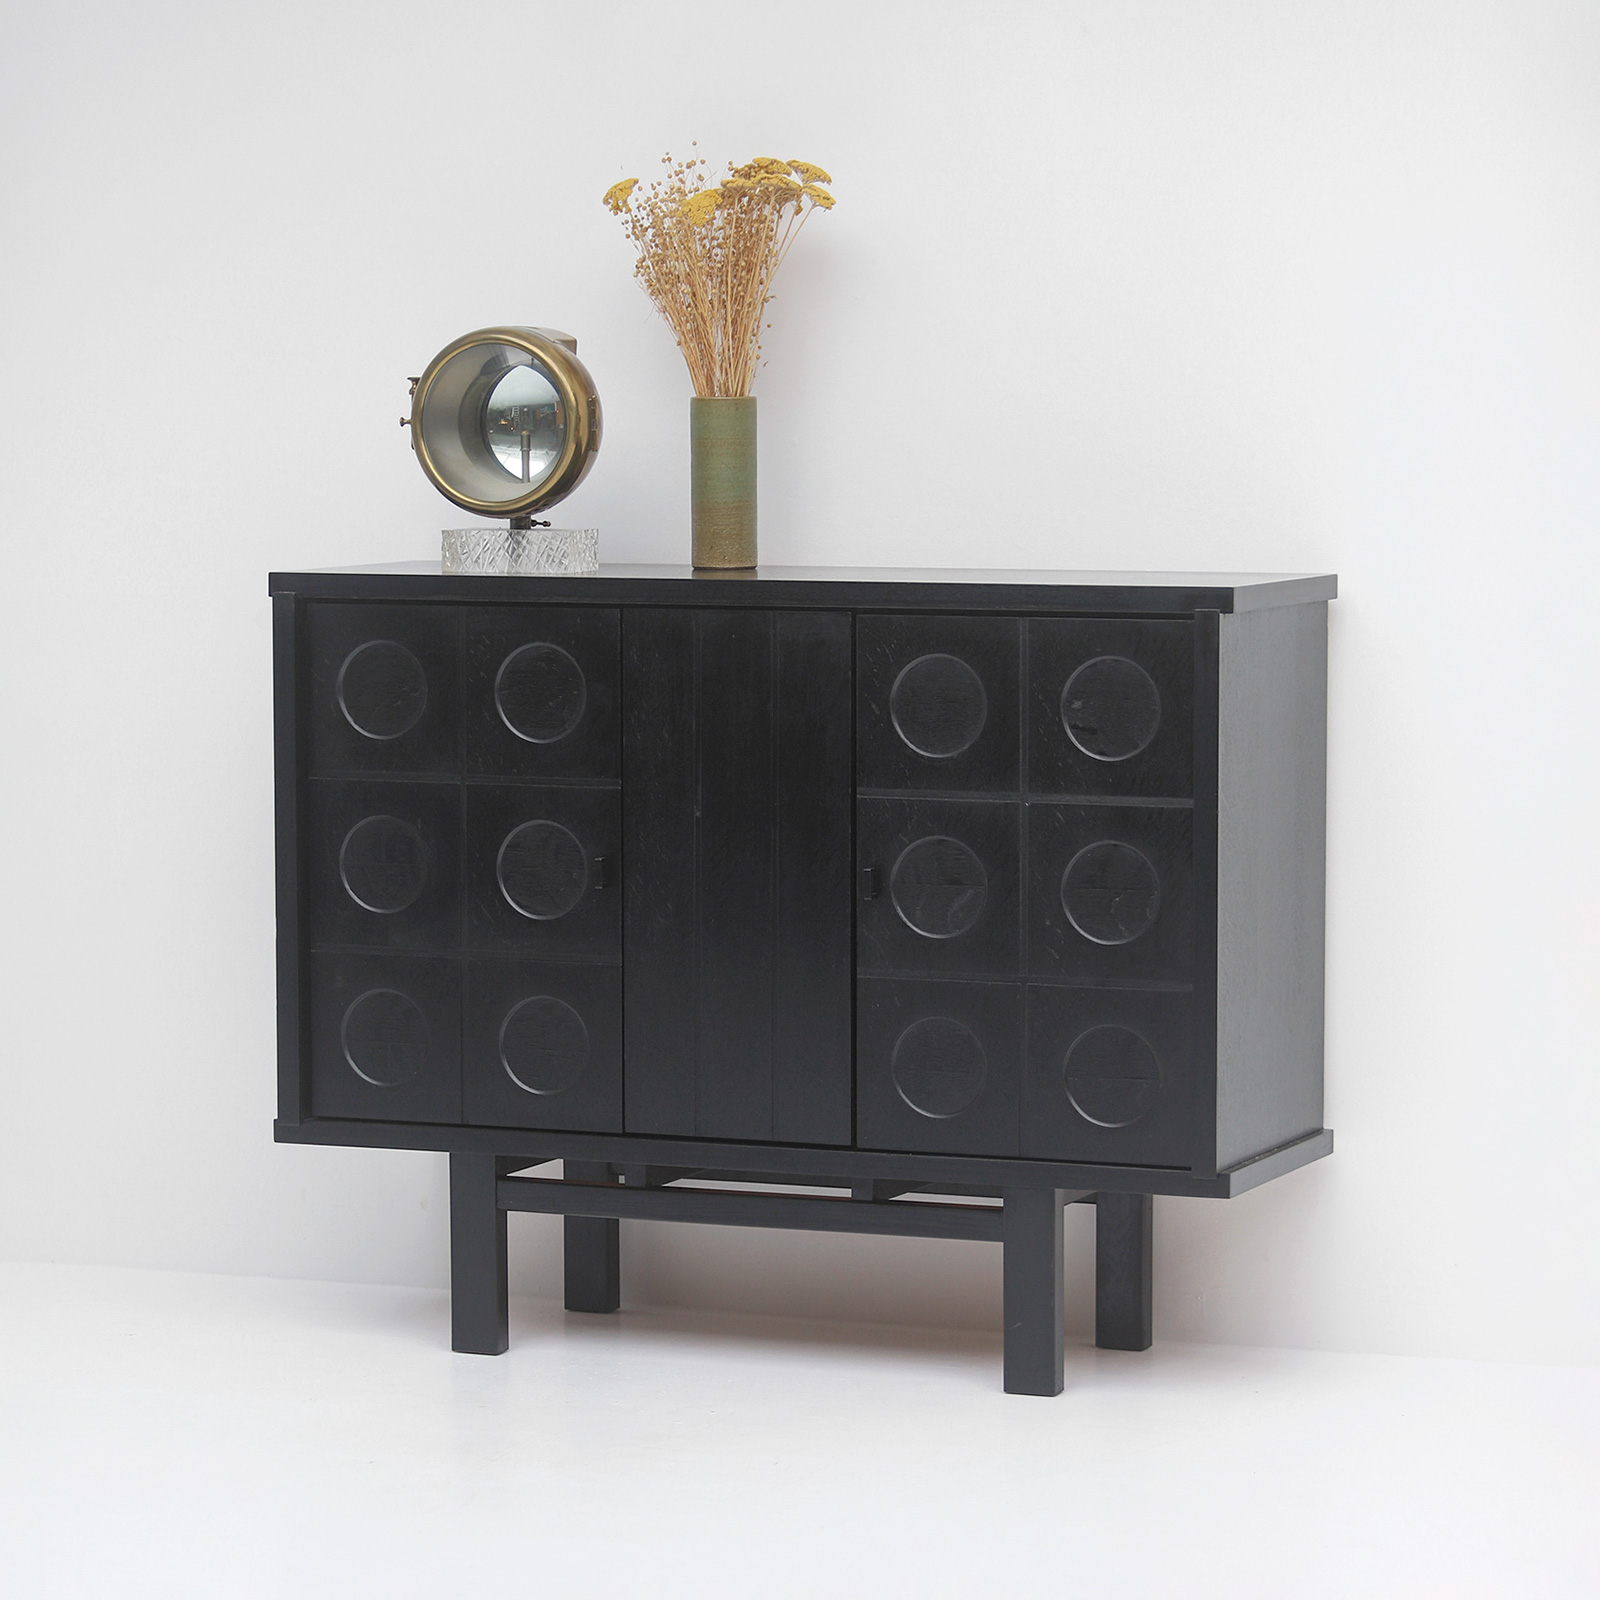 Decorative Black Cabinet with Patterned doors 